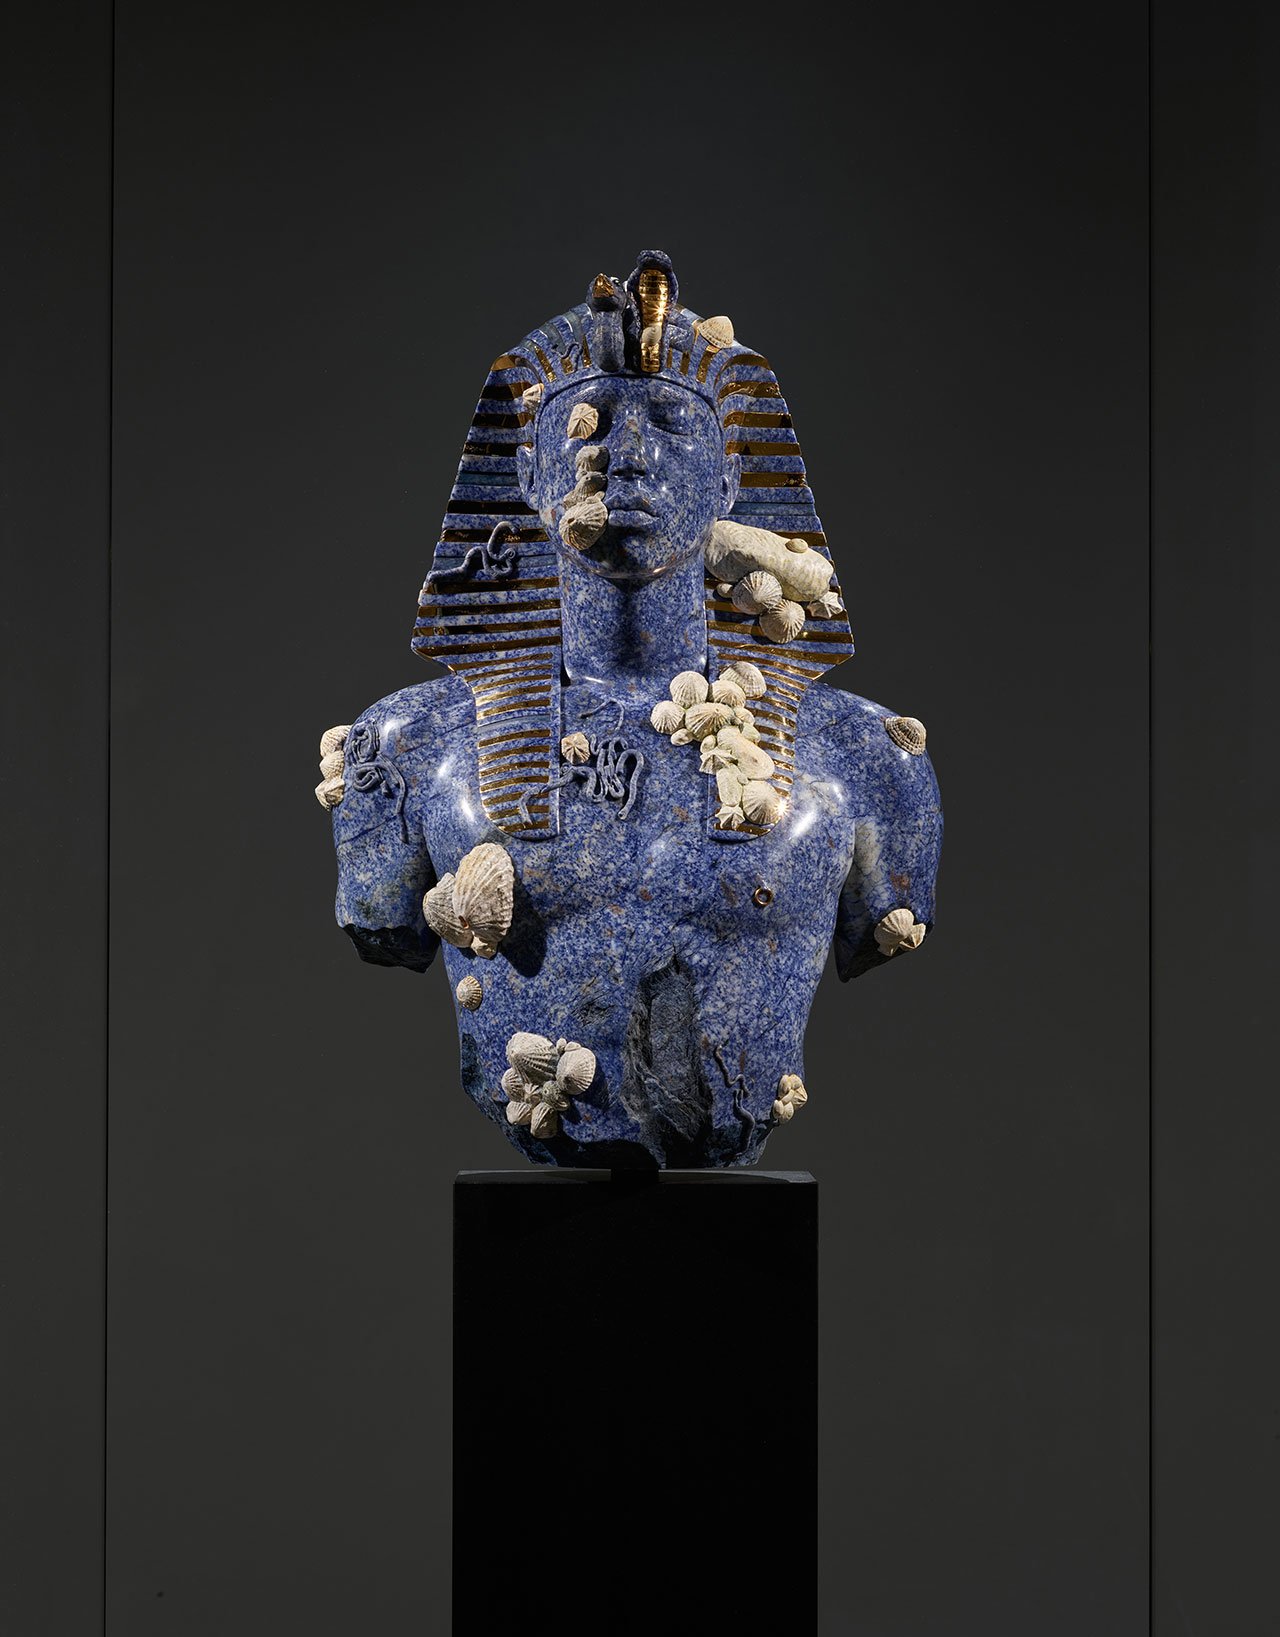 Damien Hirst, Unknown Pharaoh. Photographed by Prudence Cuming Associates © Damien Hirst and Science Ltd. All rights reserved, DACS 2017.